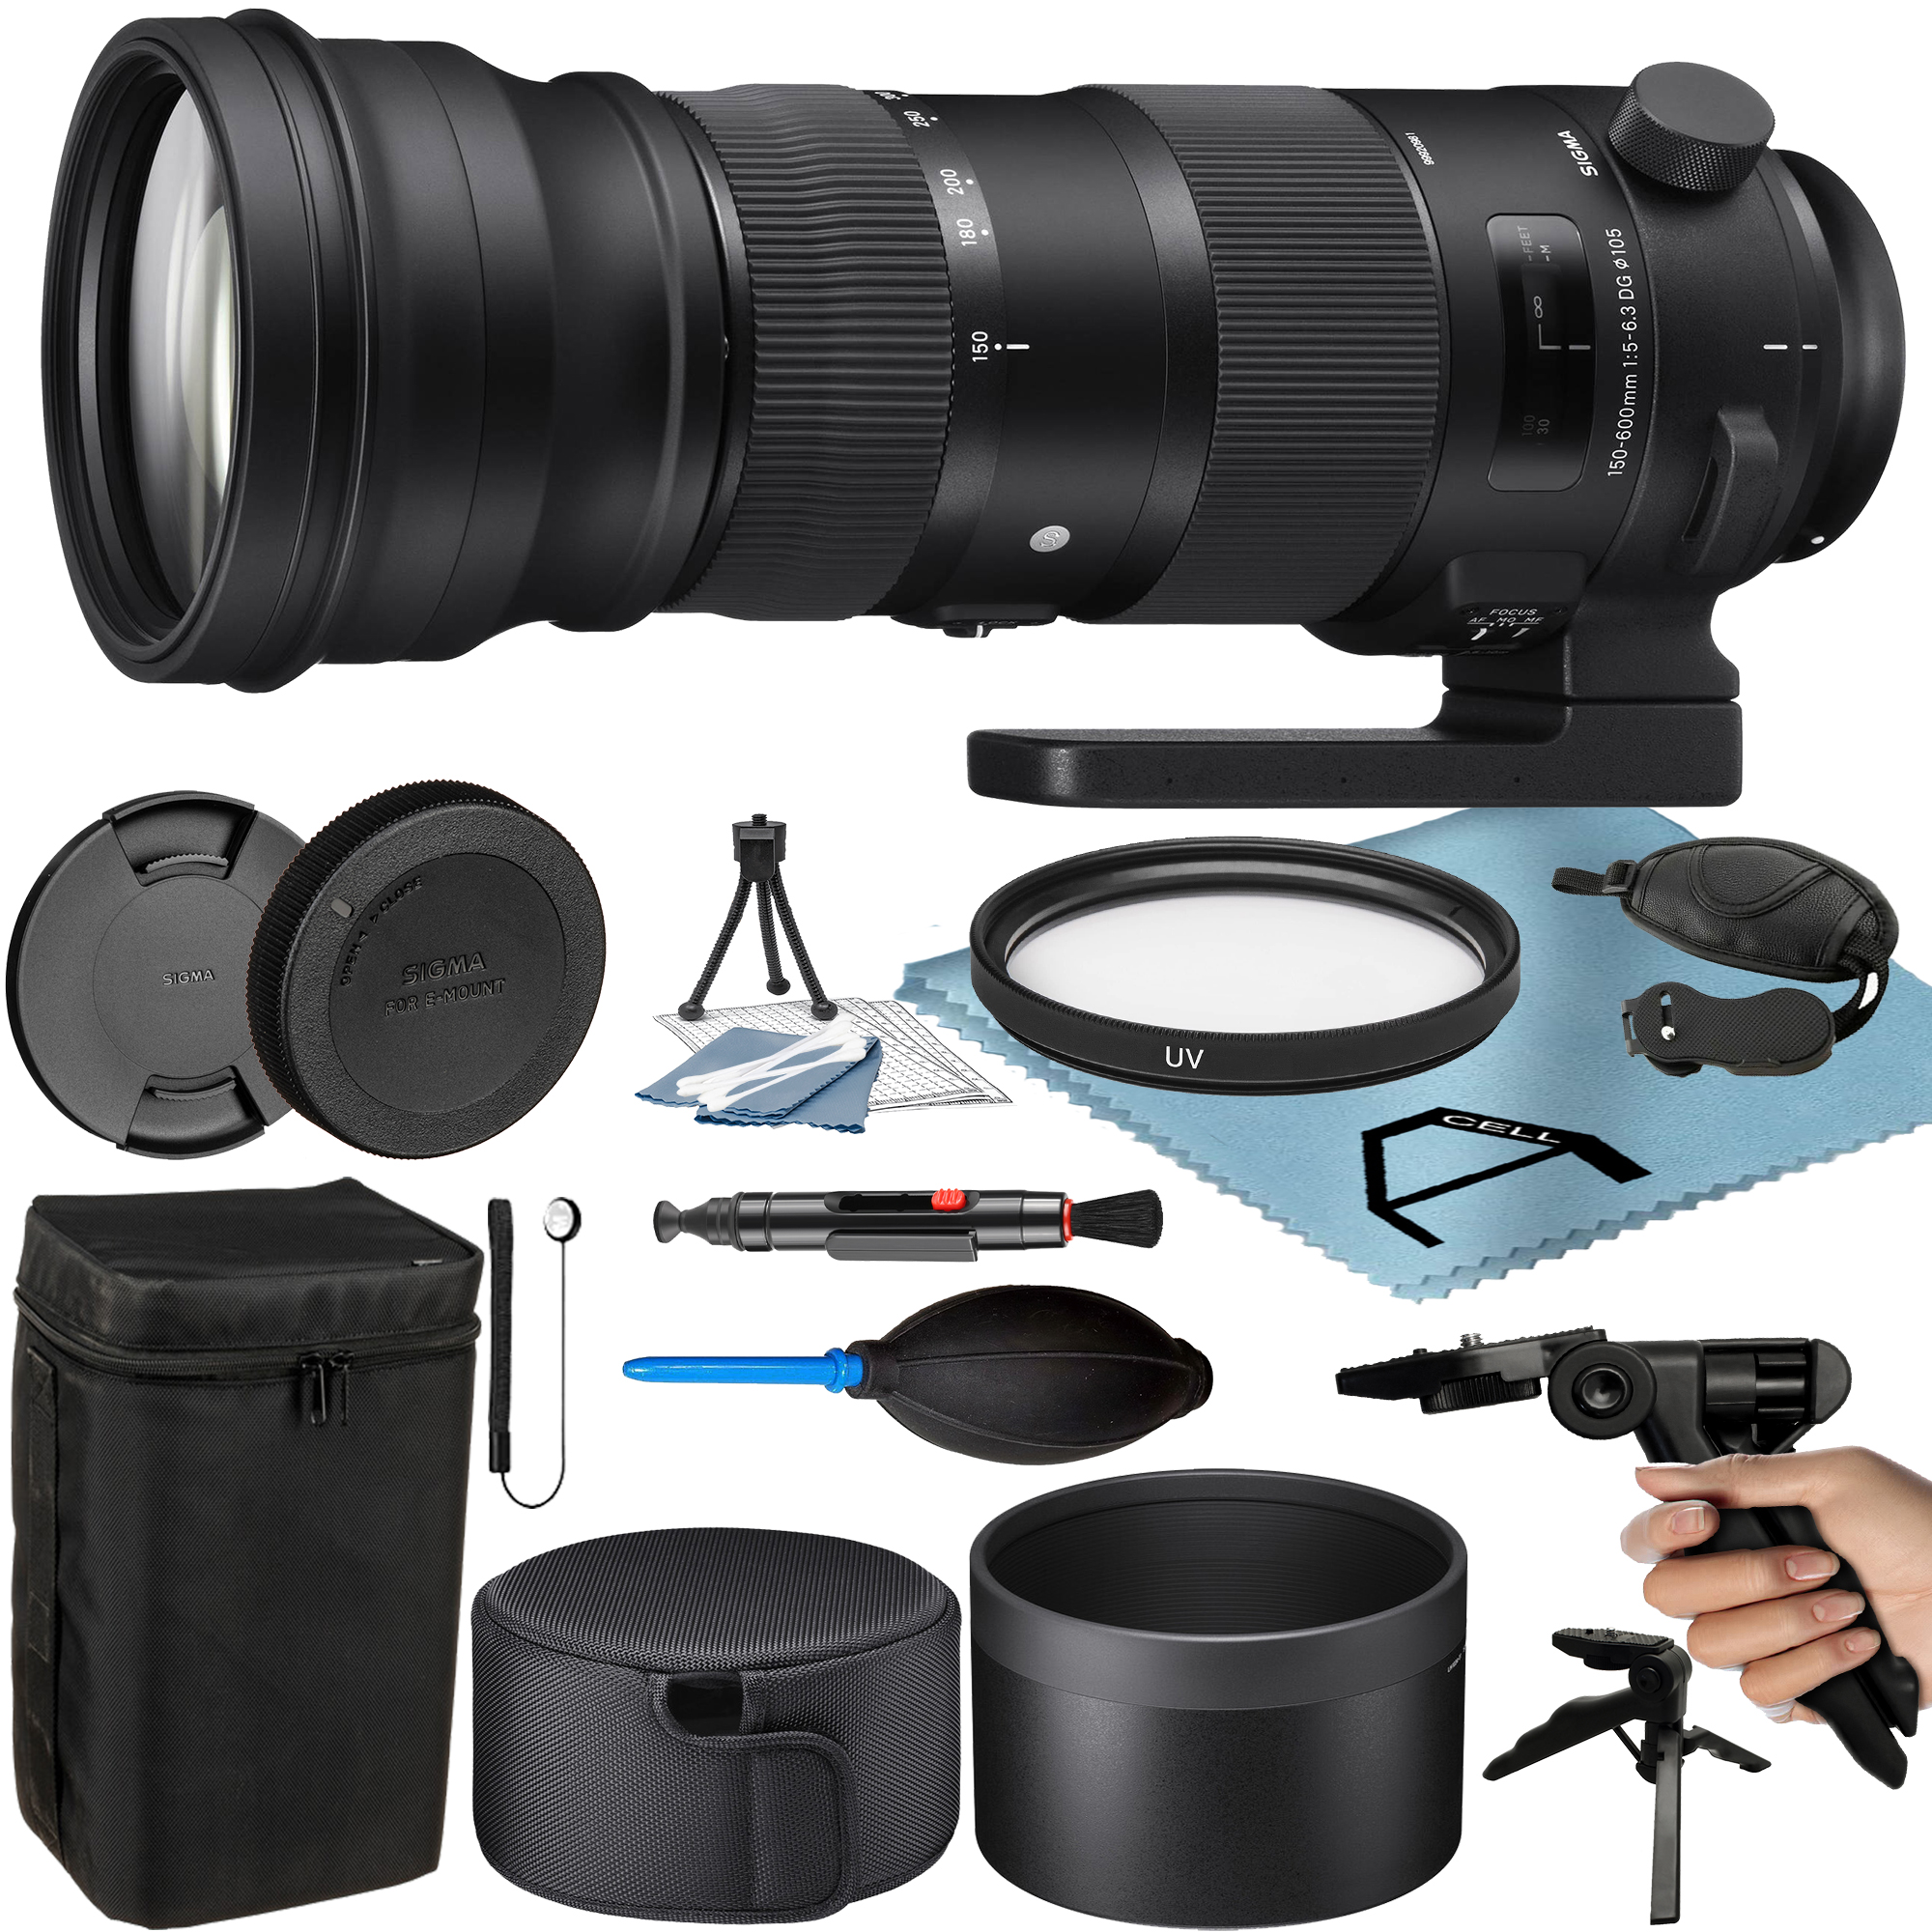 Sigma 150-600mm F/5-6.3 DG OS HSM Sports Lens for Canon EF with Tripod UV  Filter A-Cell Accessory Bundle